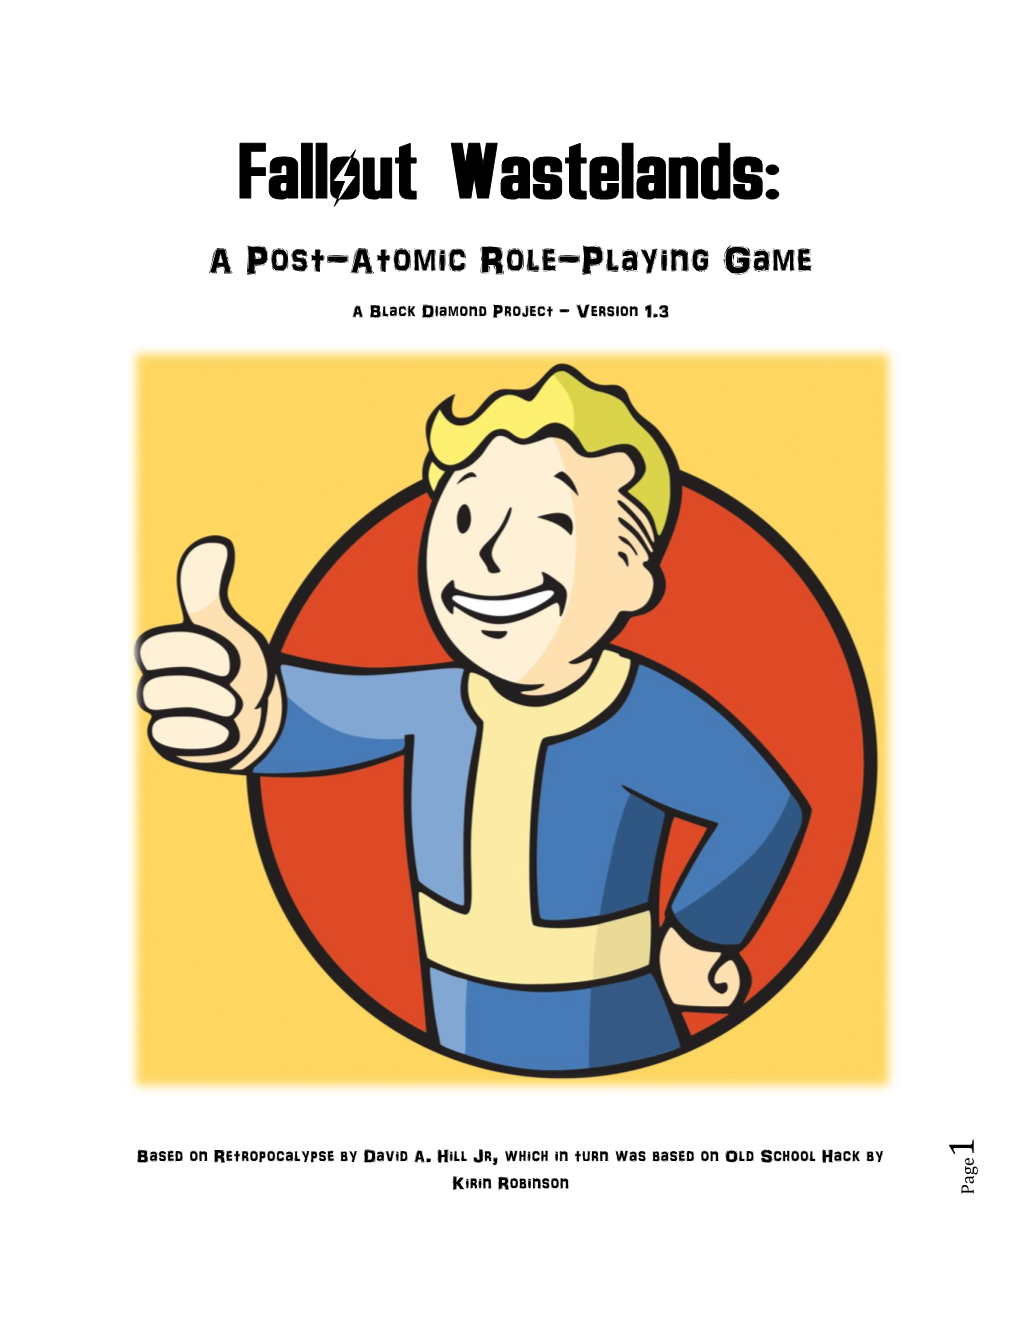 Fallout Wastelands: a Post-Atomic Role-Playing Game